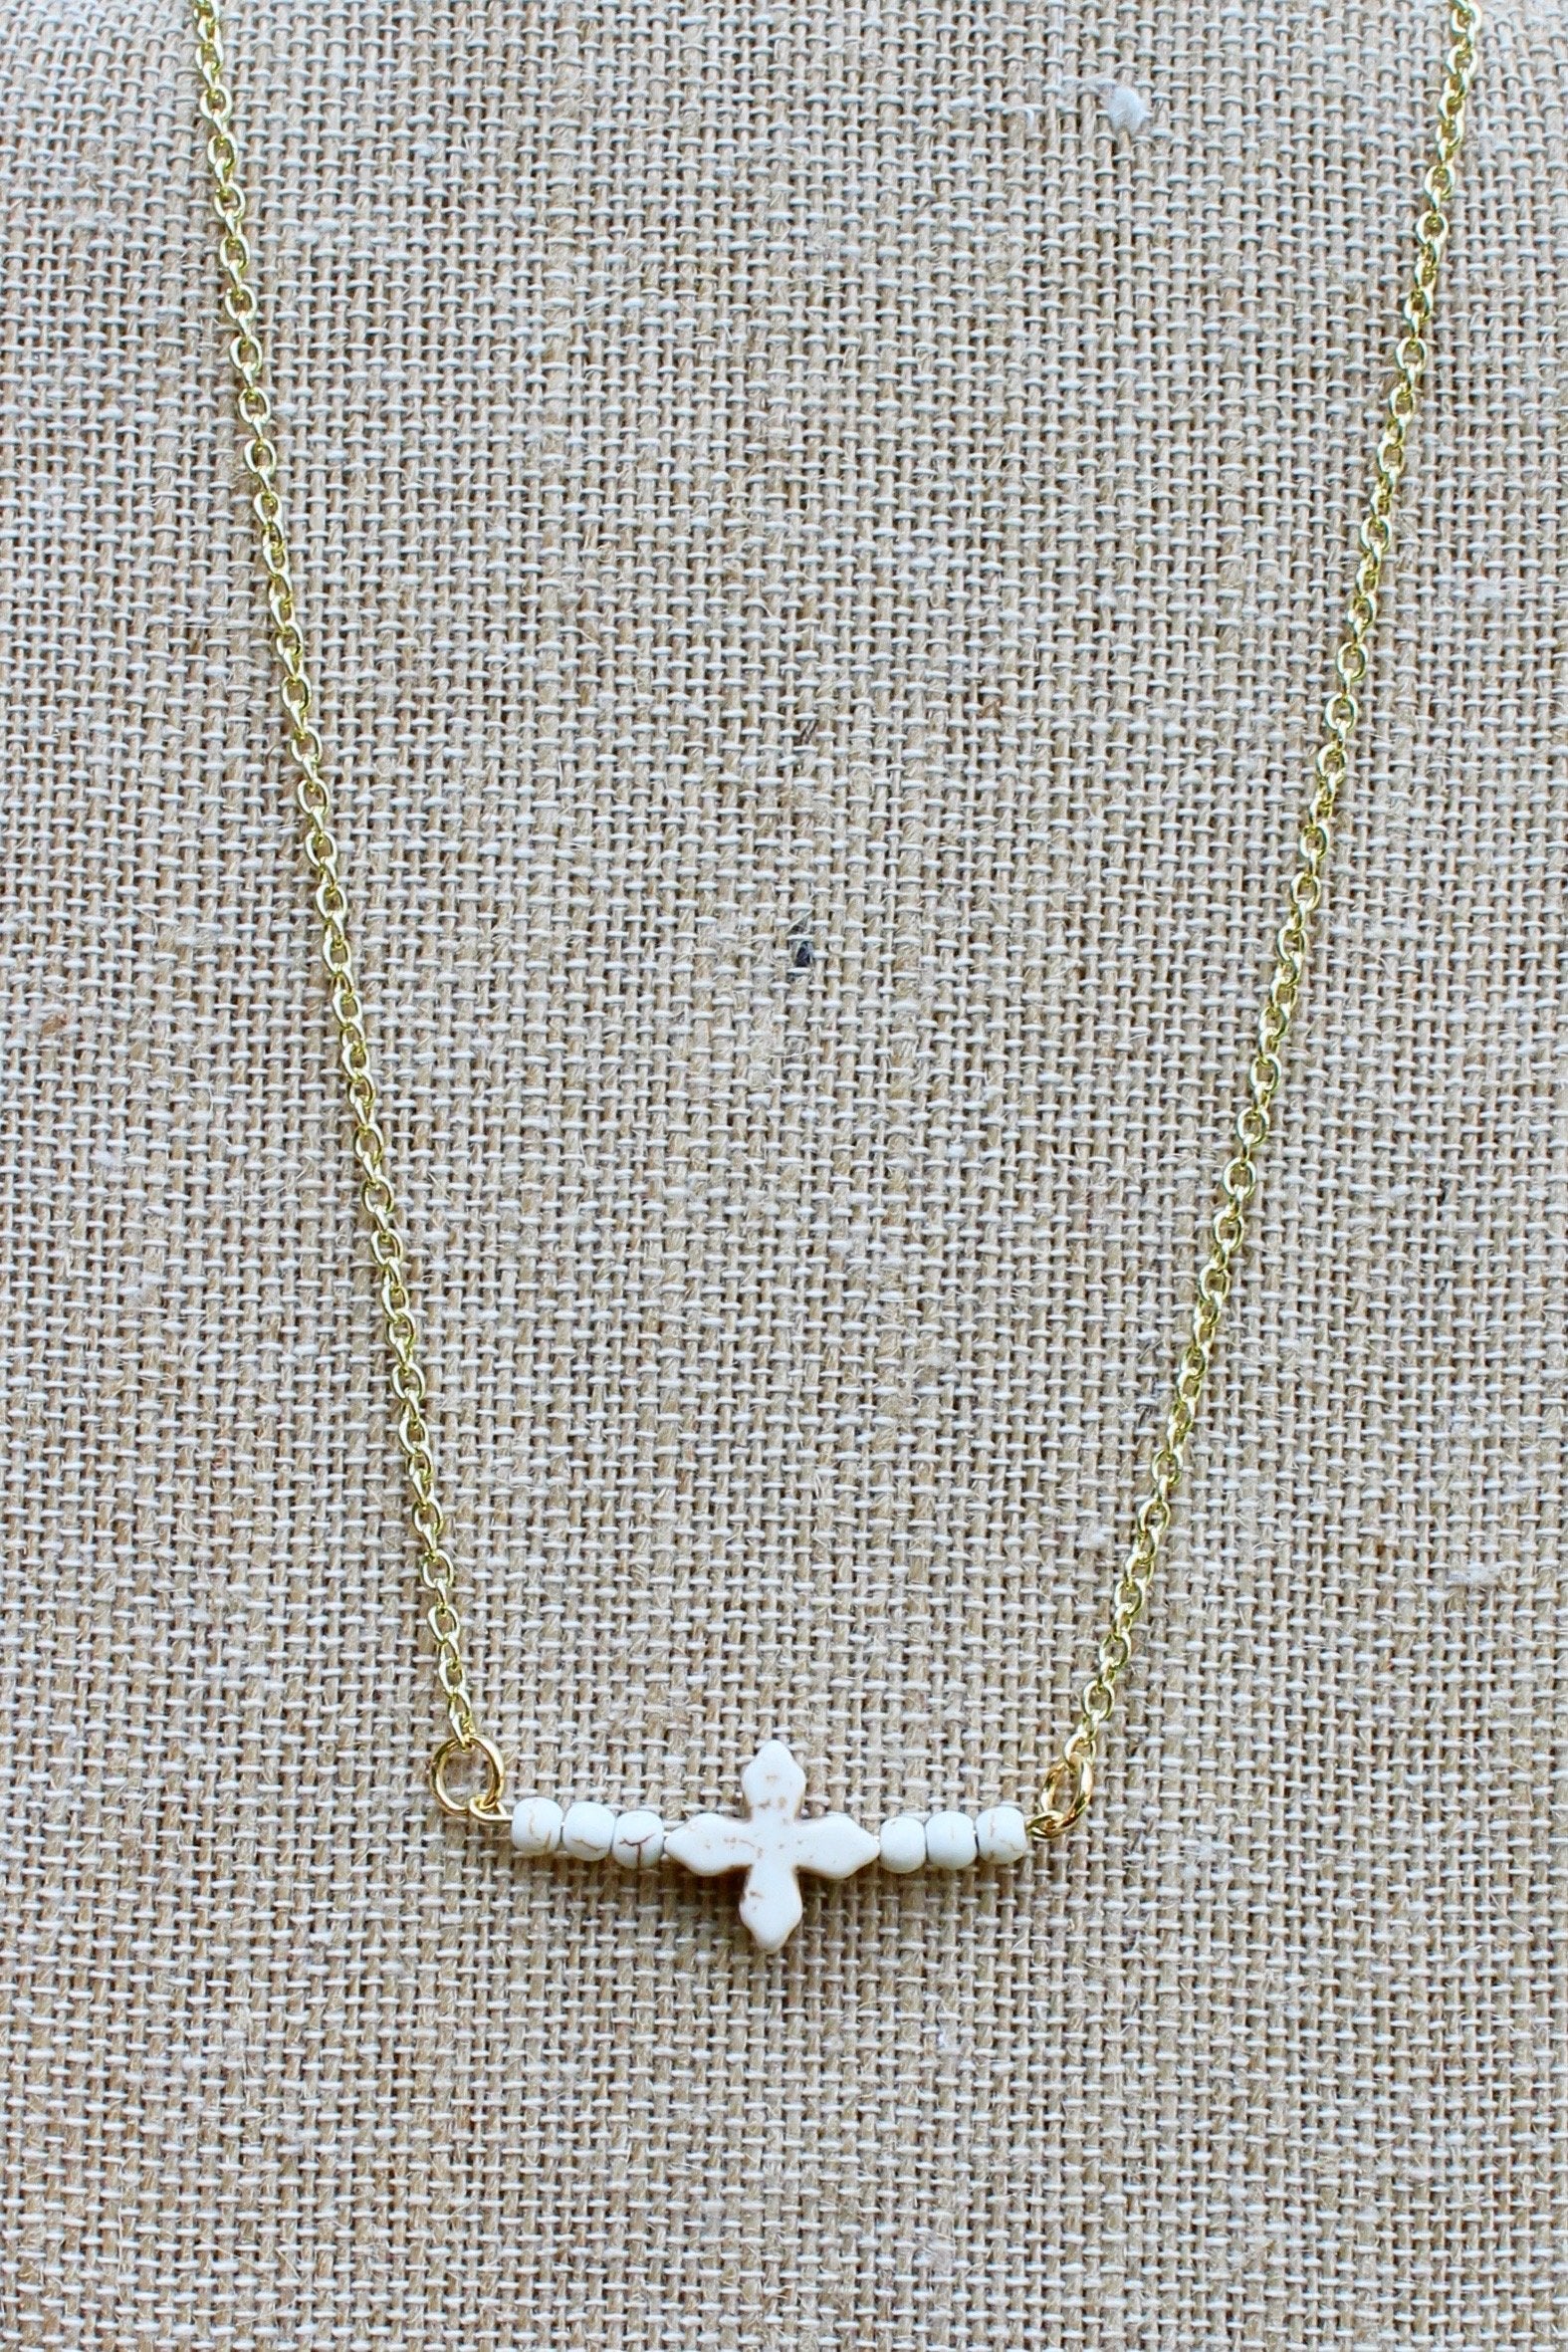 N150GW; White Stone Cross; Beads; Goldtone Chain; Approximately 16 inches; ; ; Majestees